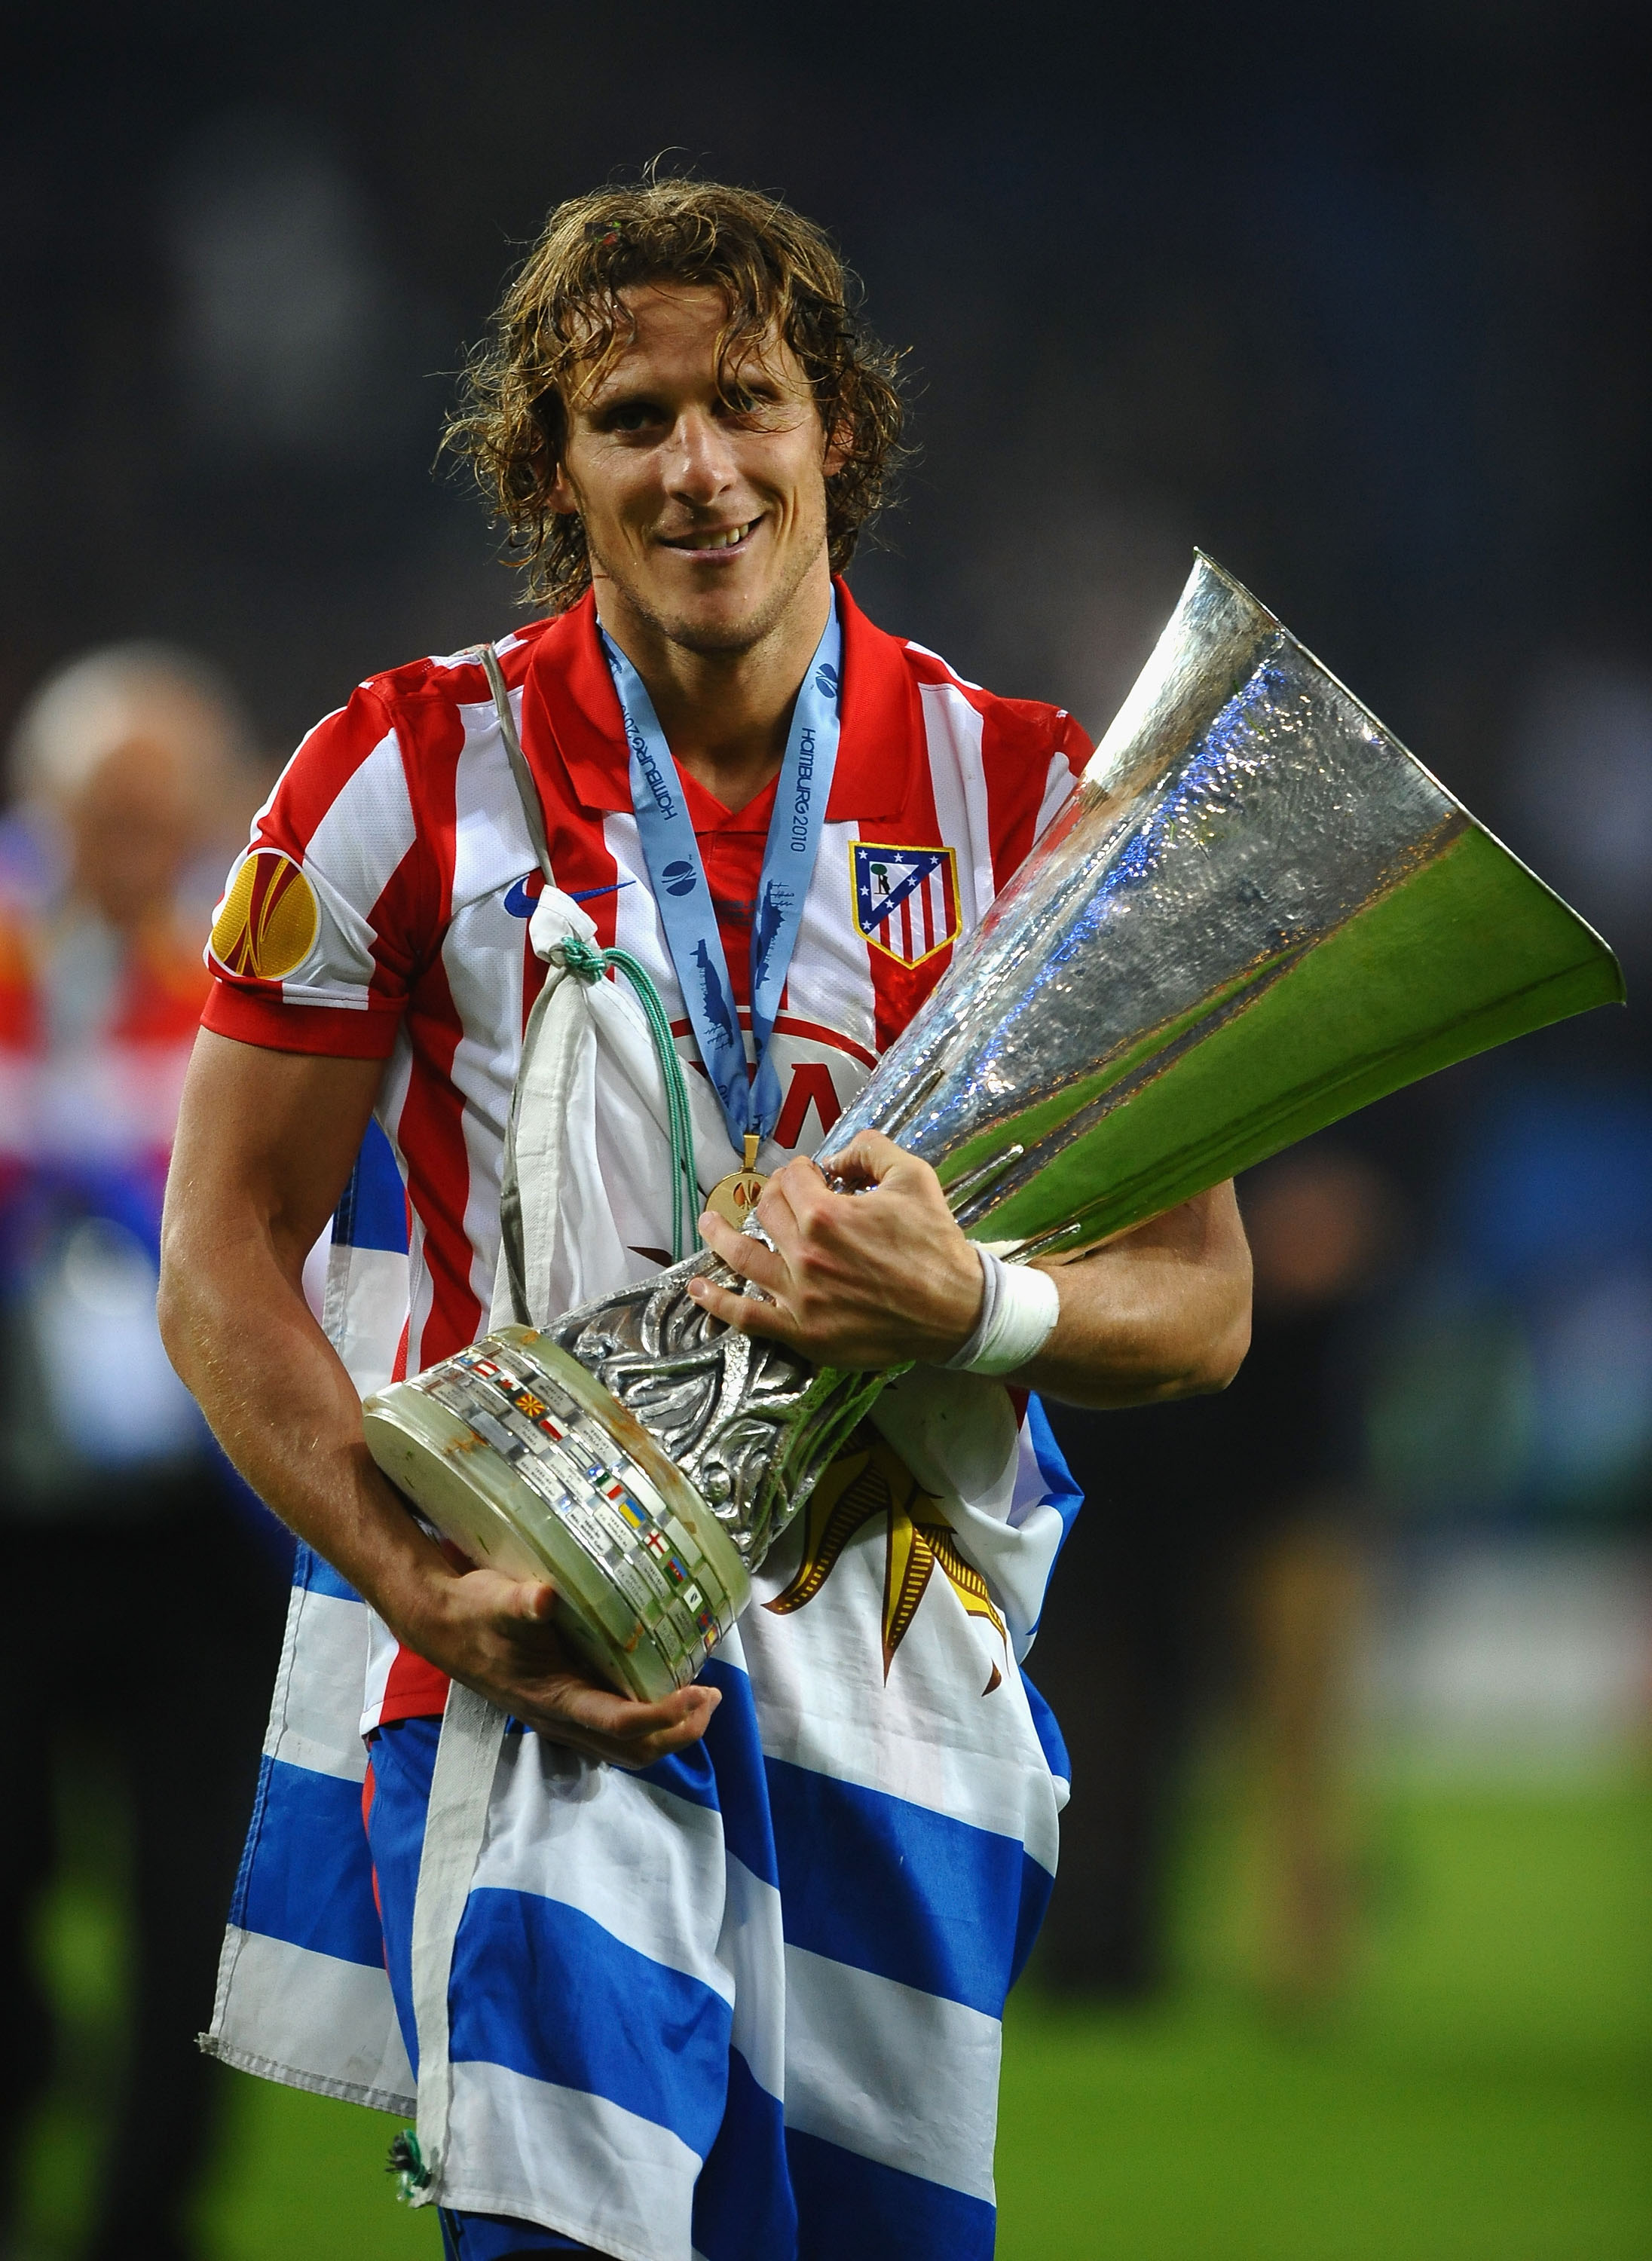 HAMBURG, GERMANY - MAY 12: Diego Forlan of Atletico Madrid holds the UEFA Europa League trophy following his team's victory after extra time at the end of the UEFA Europa League final match between Atletico Madrid and Fulham at HSH Nordbank Arena on May 1